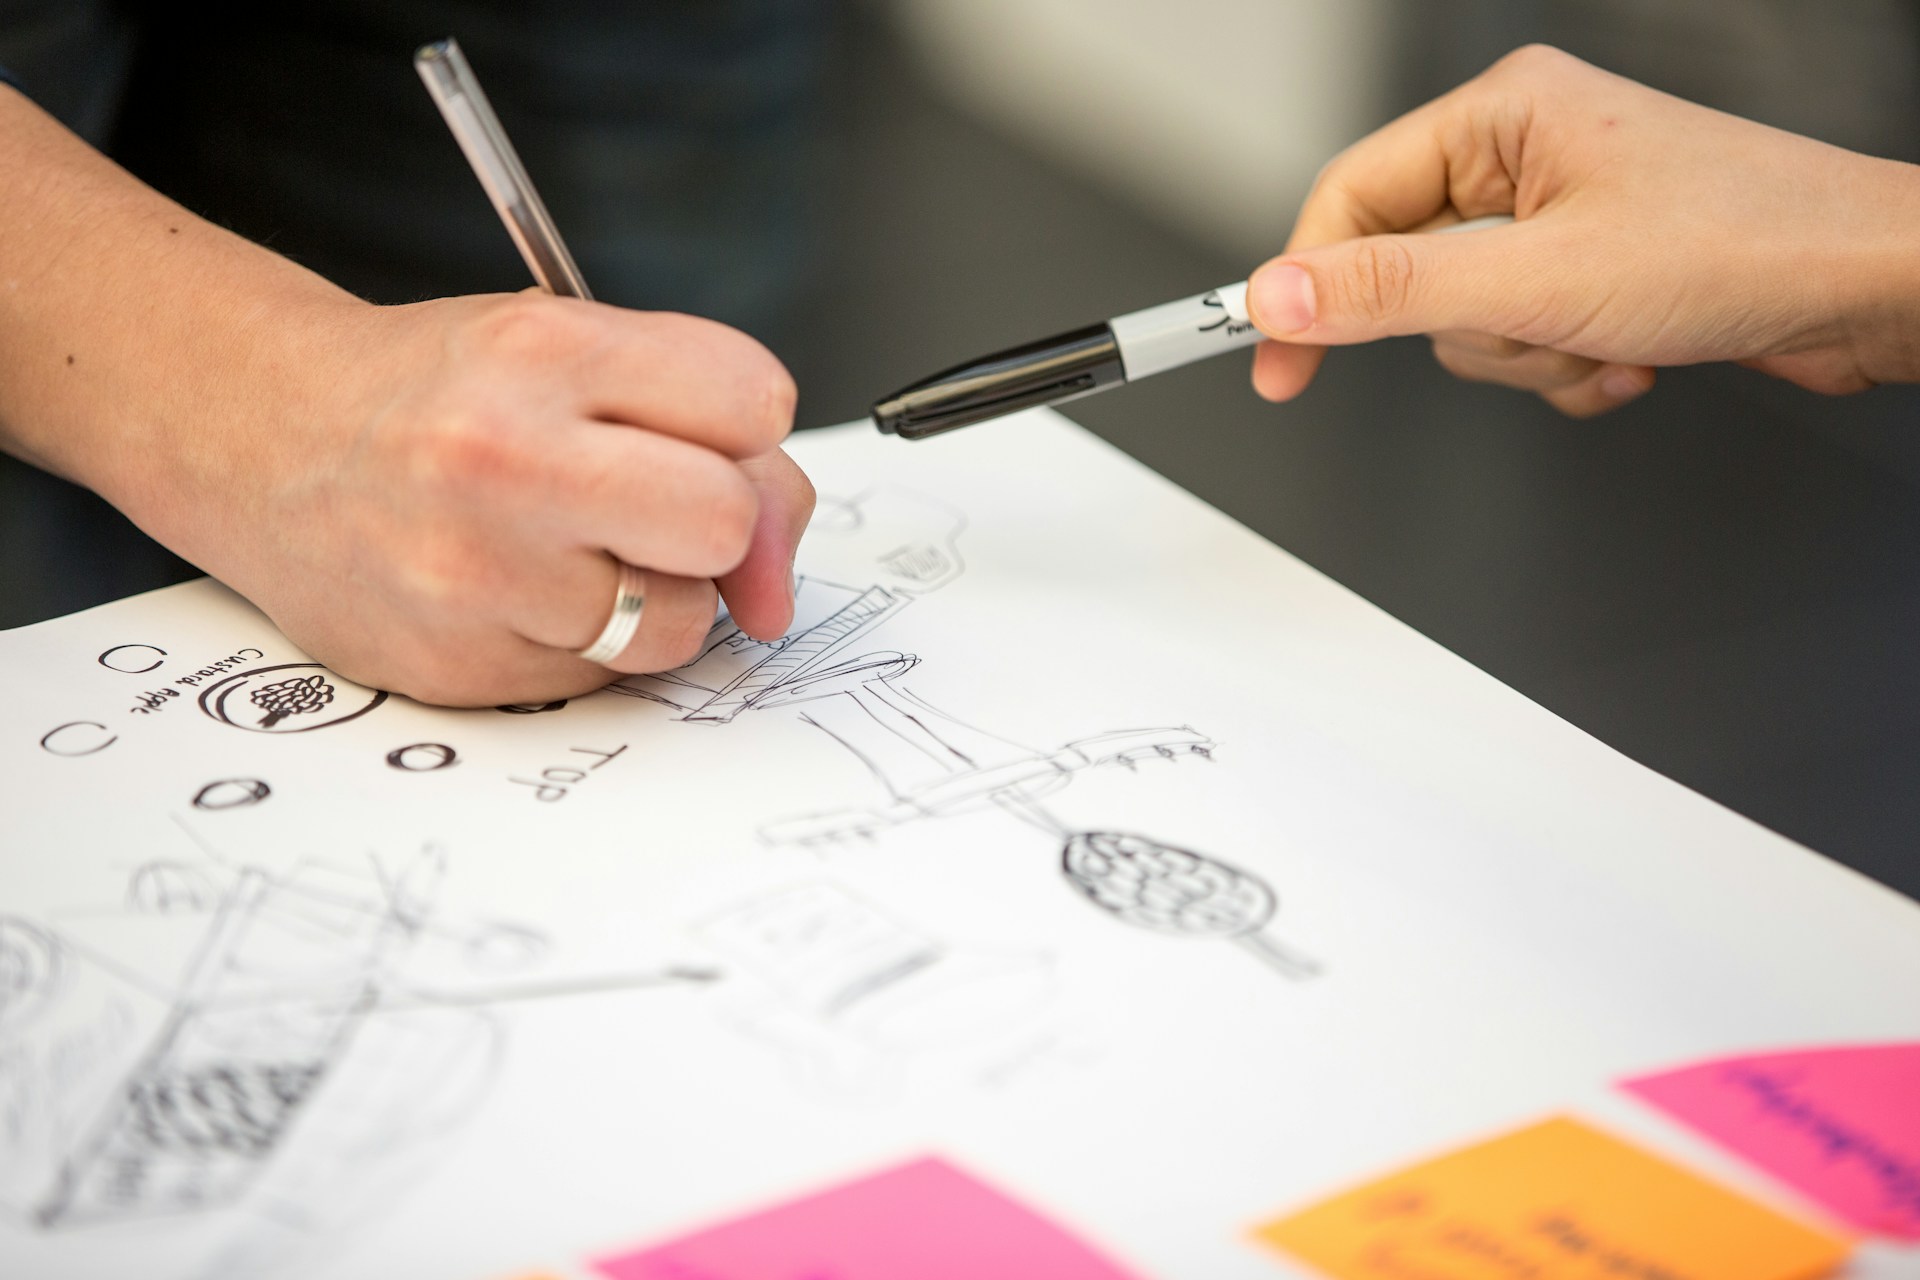 Prototyping & testing: From paper sketches to real-world feedback